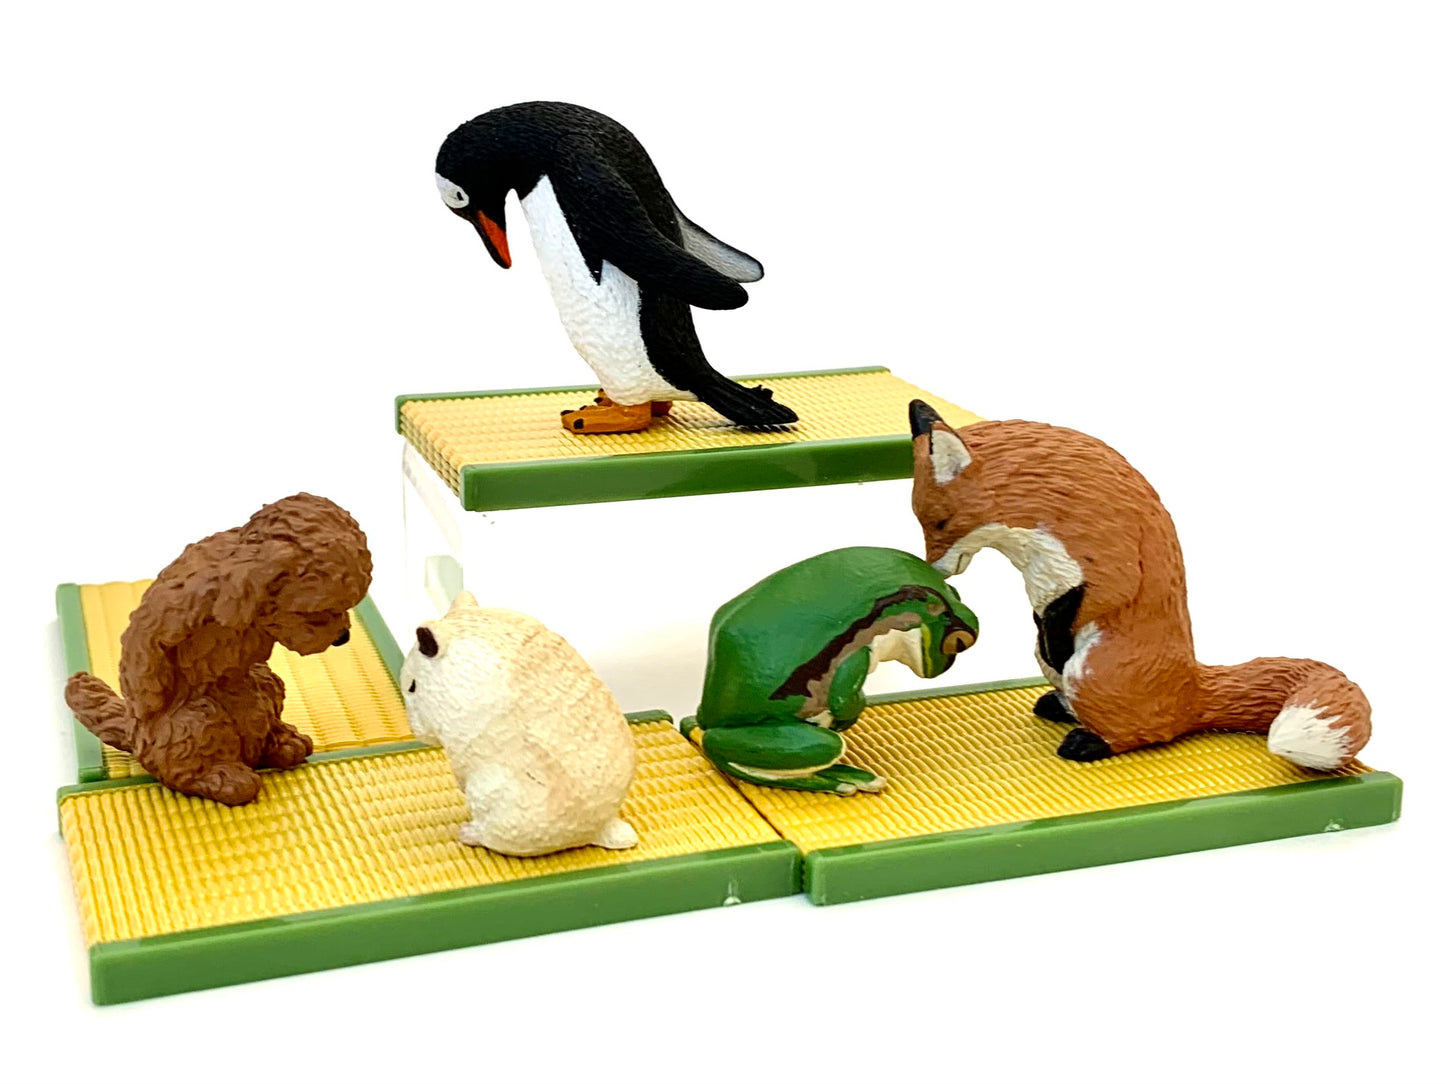 70743 BOWING ANIMALS Vol.2 BLIND BOX-10